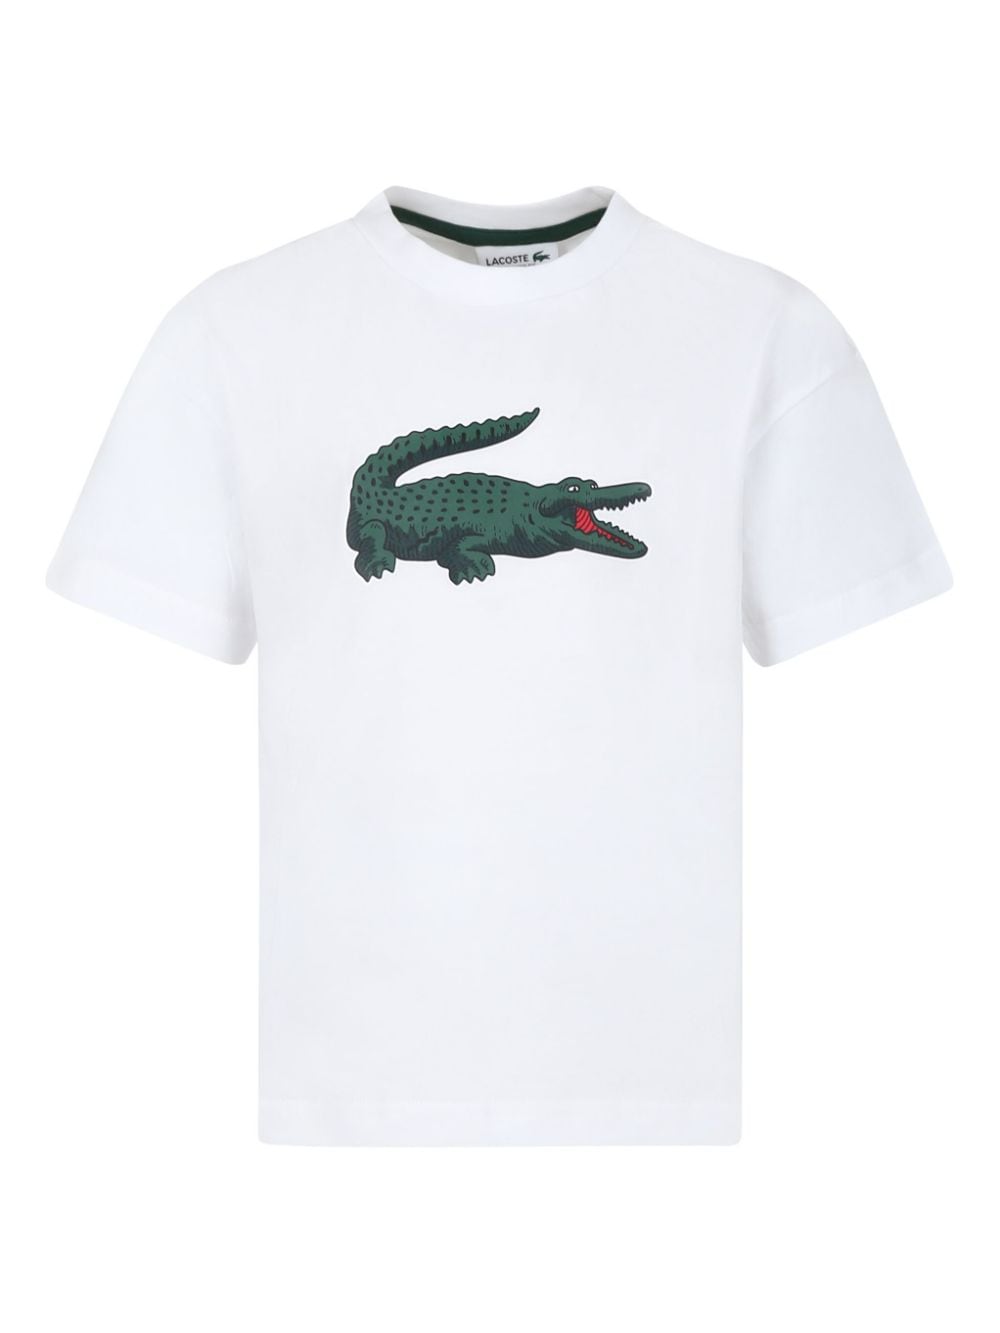 Lacoste Kids t-shirt con stampa